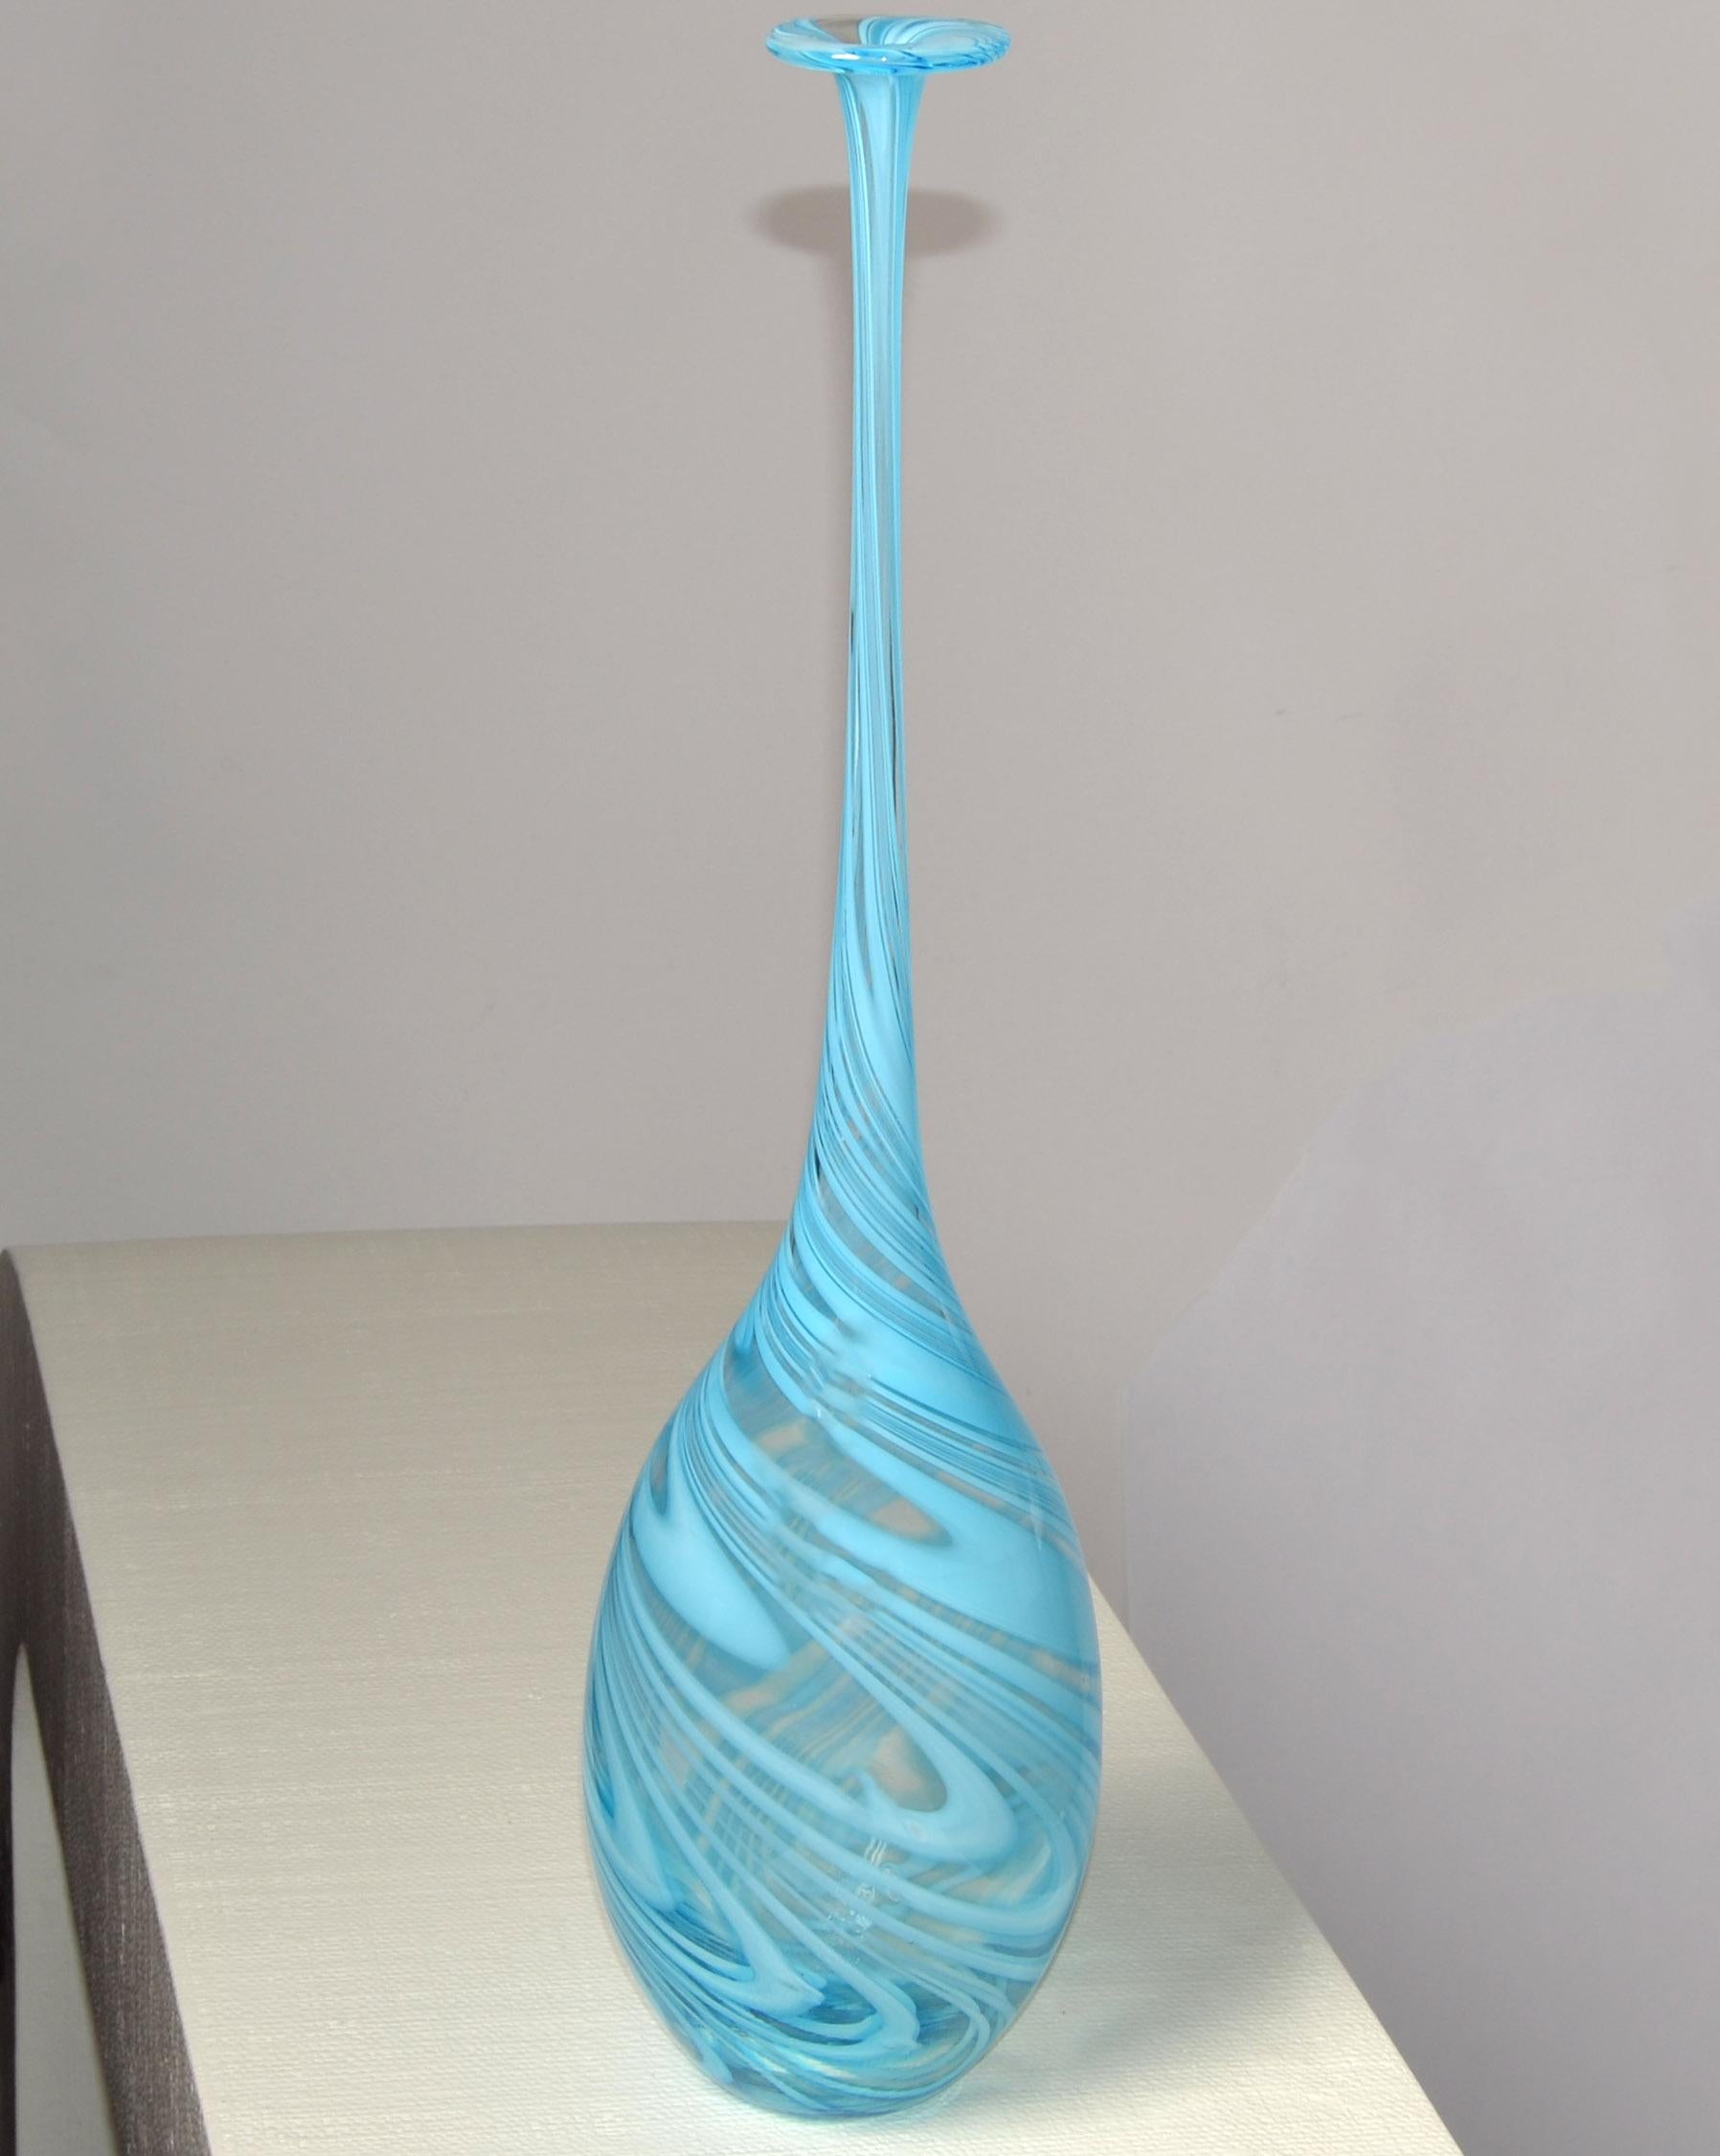 Tall Mid-Century Modern Italian blown Murano Bud Vase in baby blue swirl design attributed to Vetro Artistico.
The Vessel has a very long neck and a Teardrop style core. The Top opening looks like a Flower Blossom.
The Size is for a long single